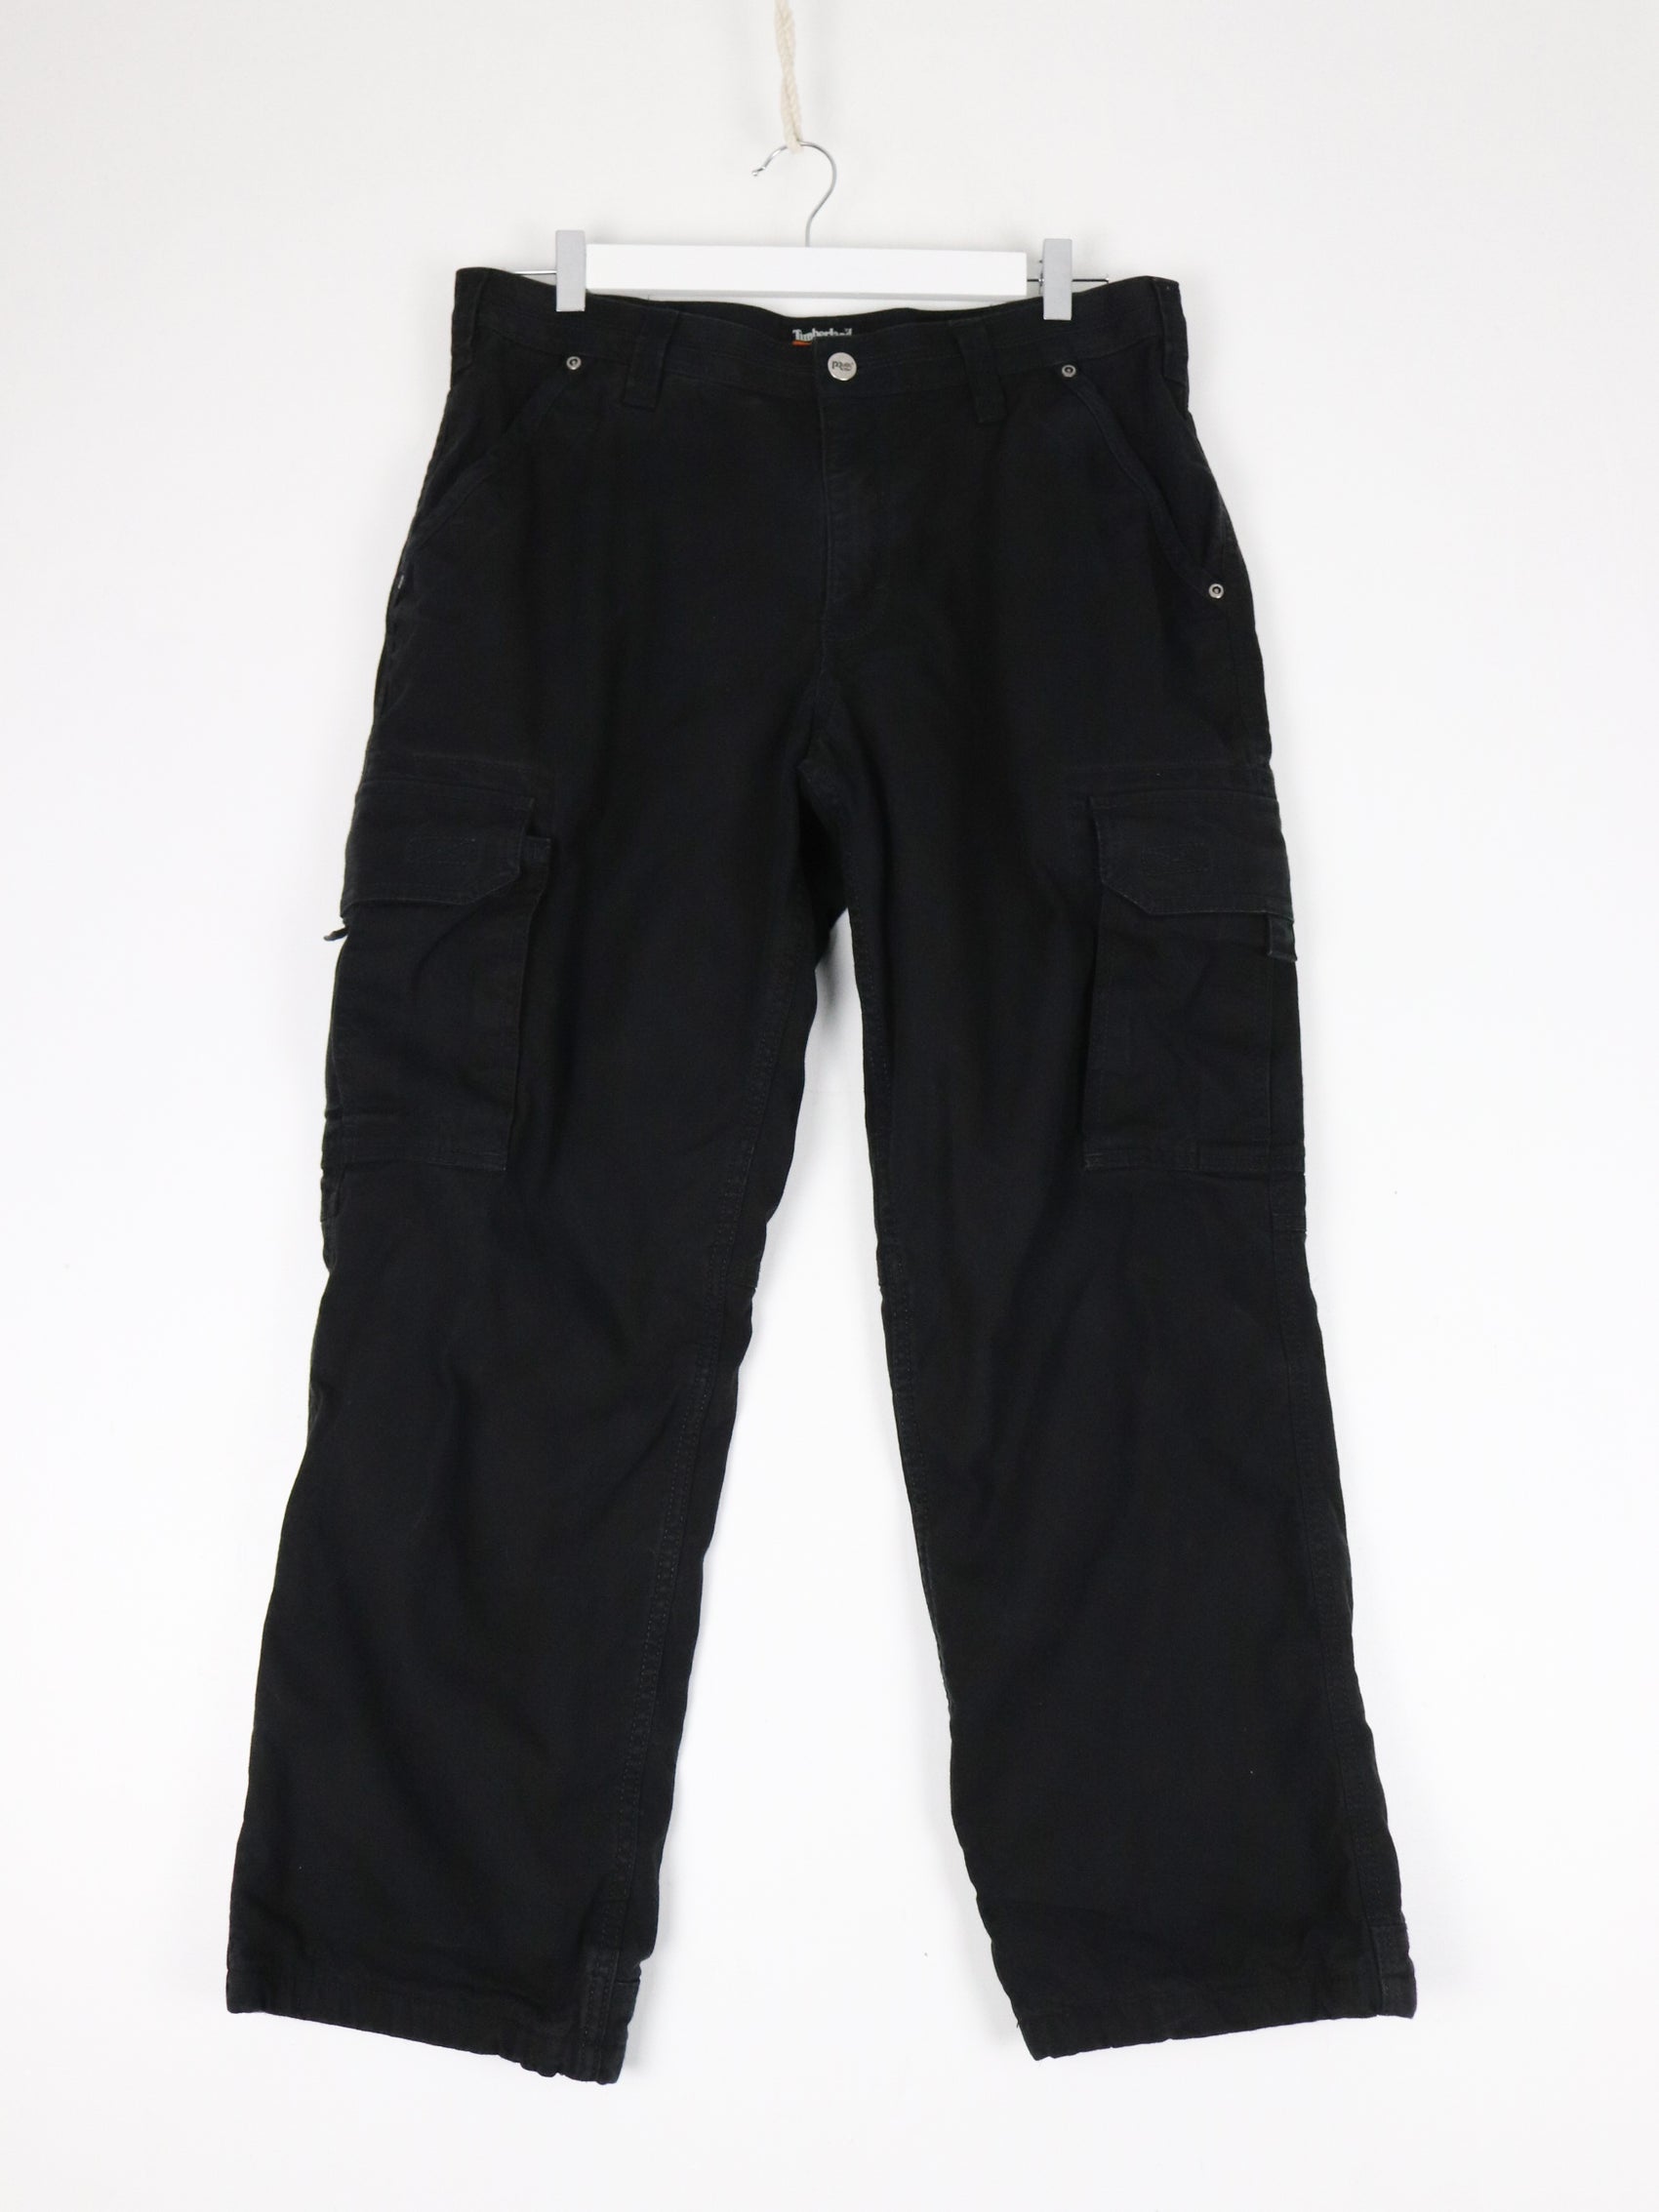 Timberland Pants Fits Mens 34 x 28 Black Cargo Lined Work Wear